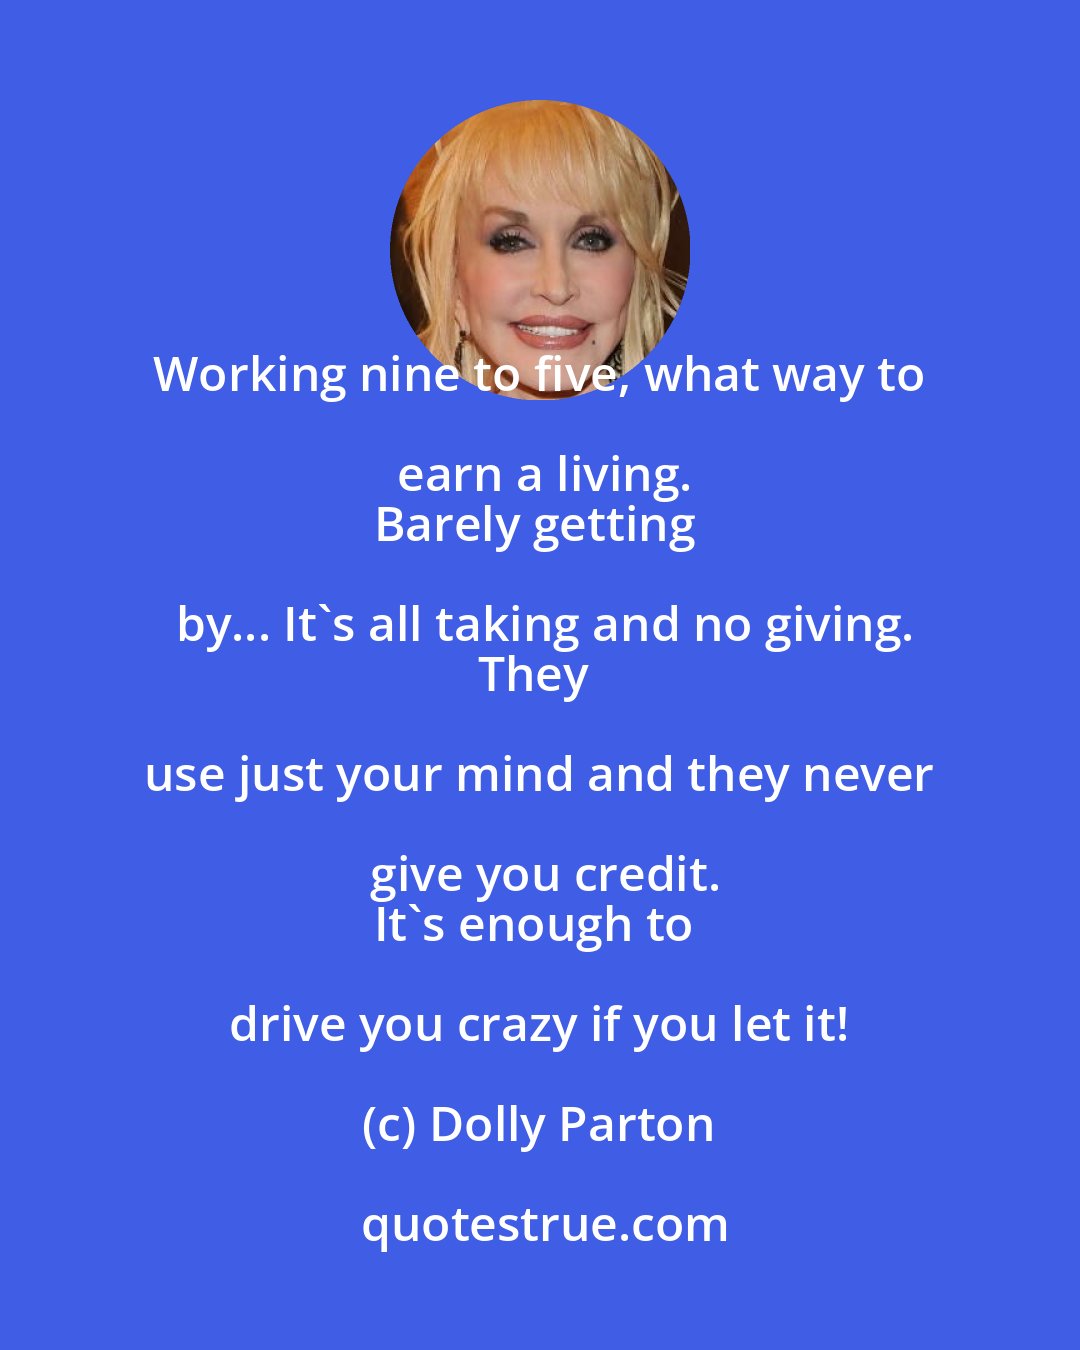 Dolly Parton: Working nine to five, what way to earn a living.
Barely getting by... It's all taking and no giving.
They use just your mind and they never give you credit.
It's enough to drive you crazy if you let it!